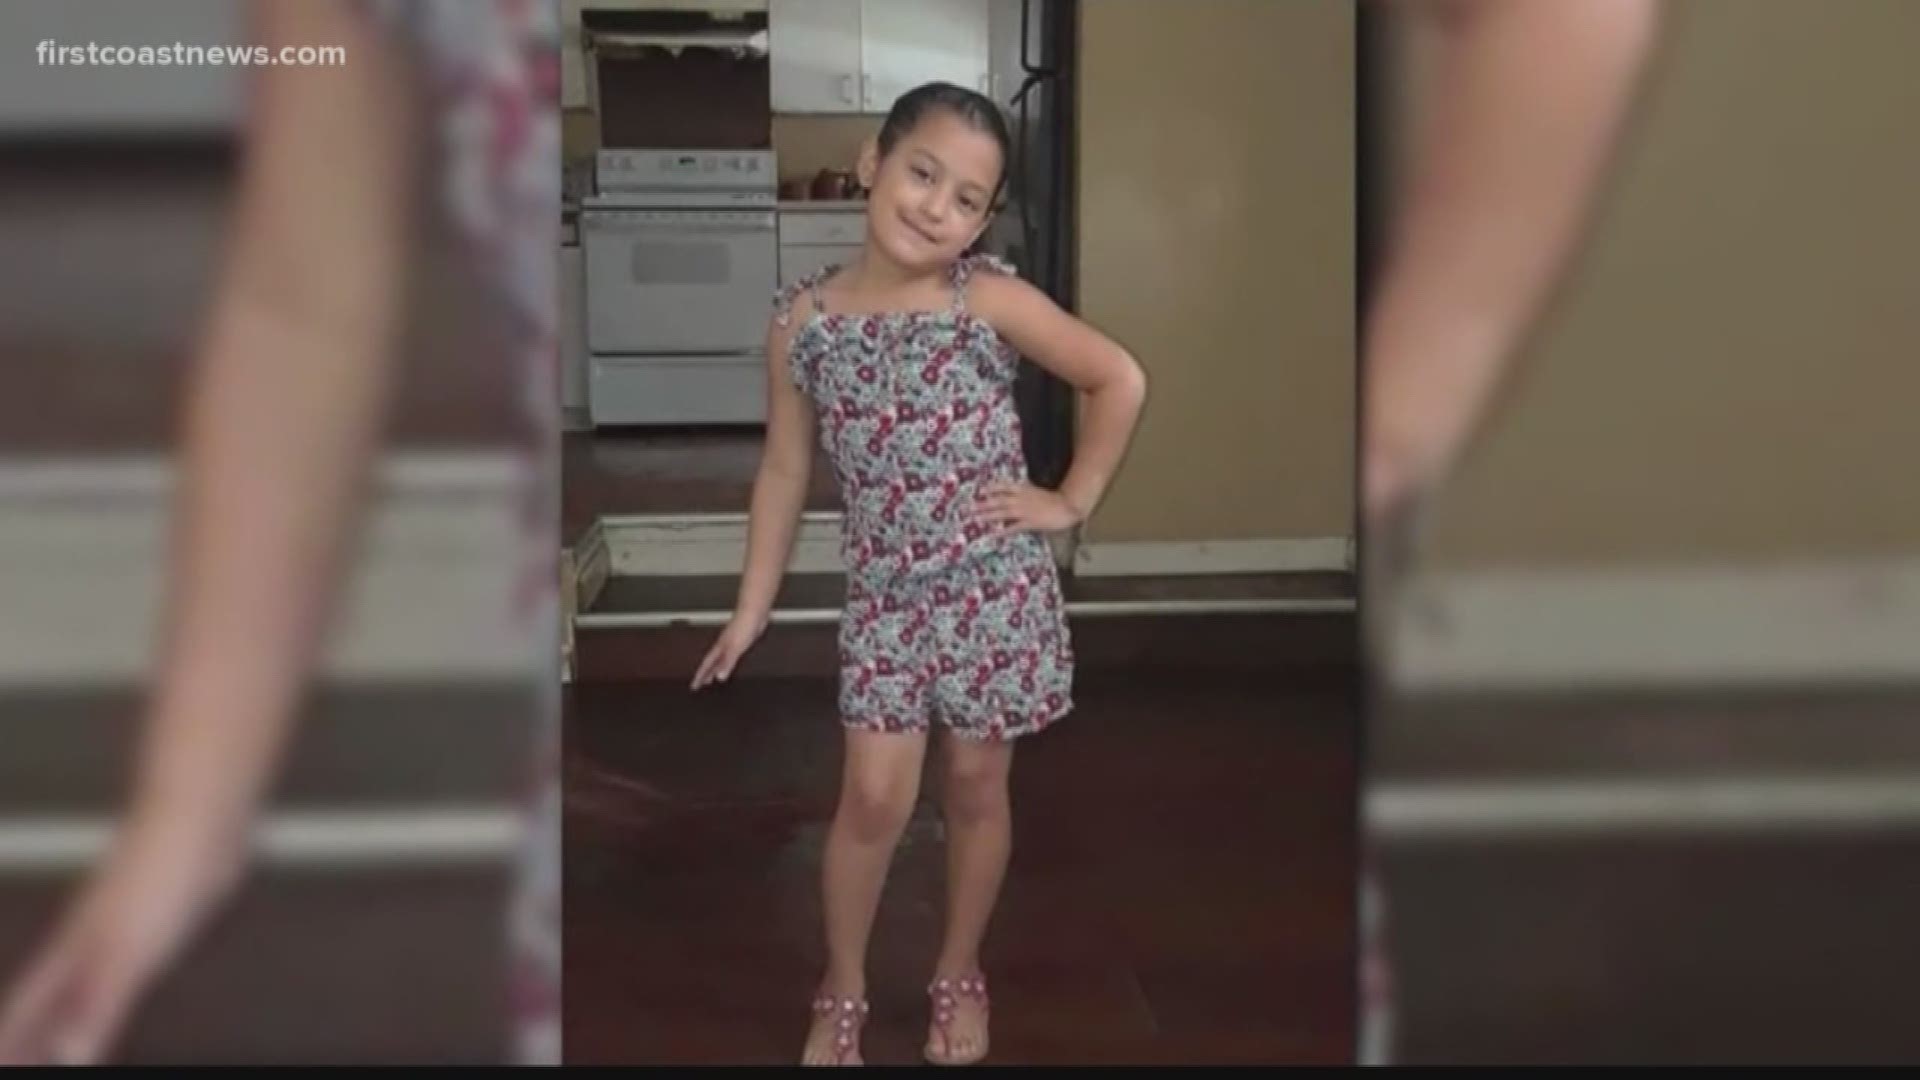 Heidy Rivas Villanueva, 7, was supposed to start her first day of school today, but her family must plan her funeral instead.